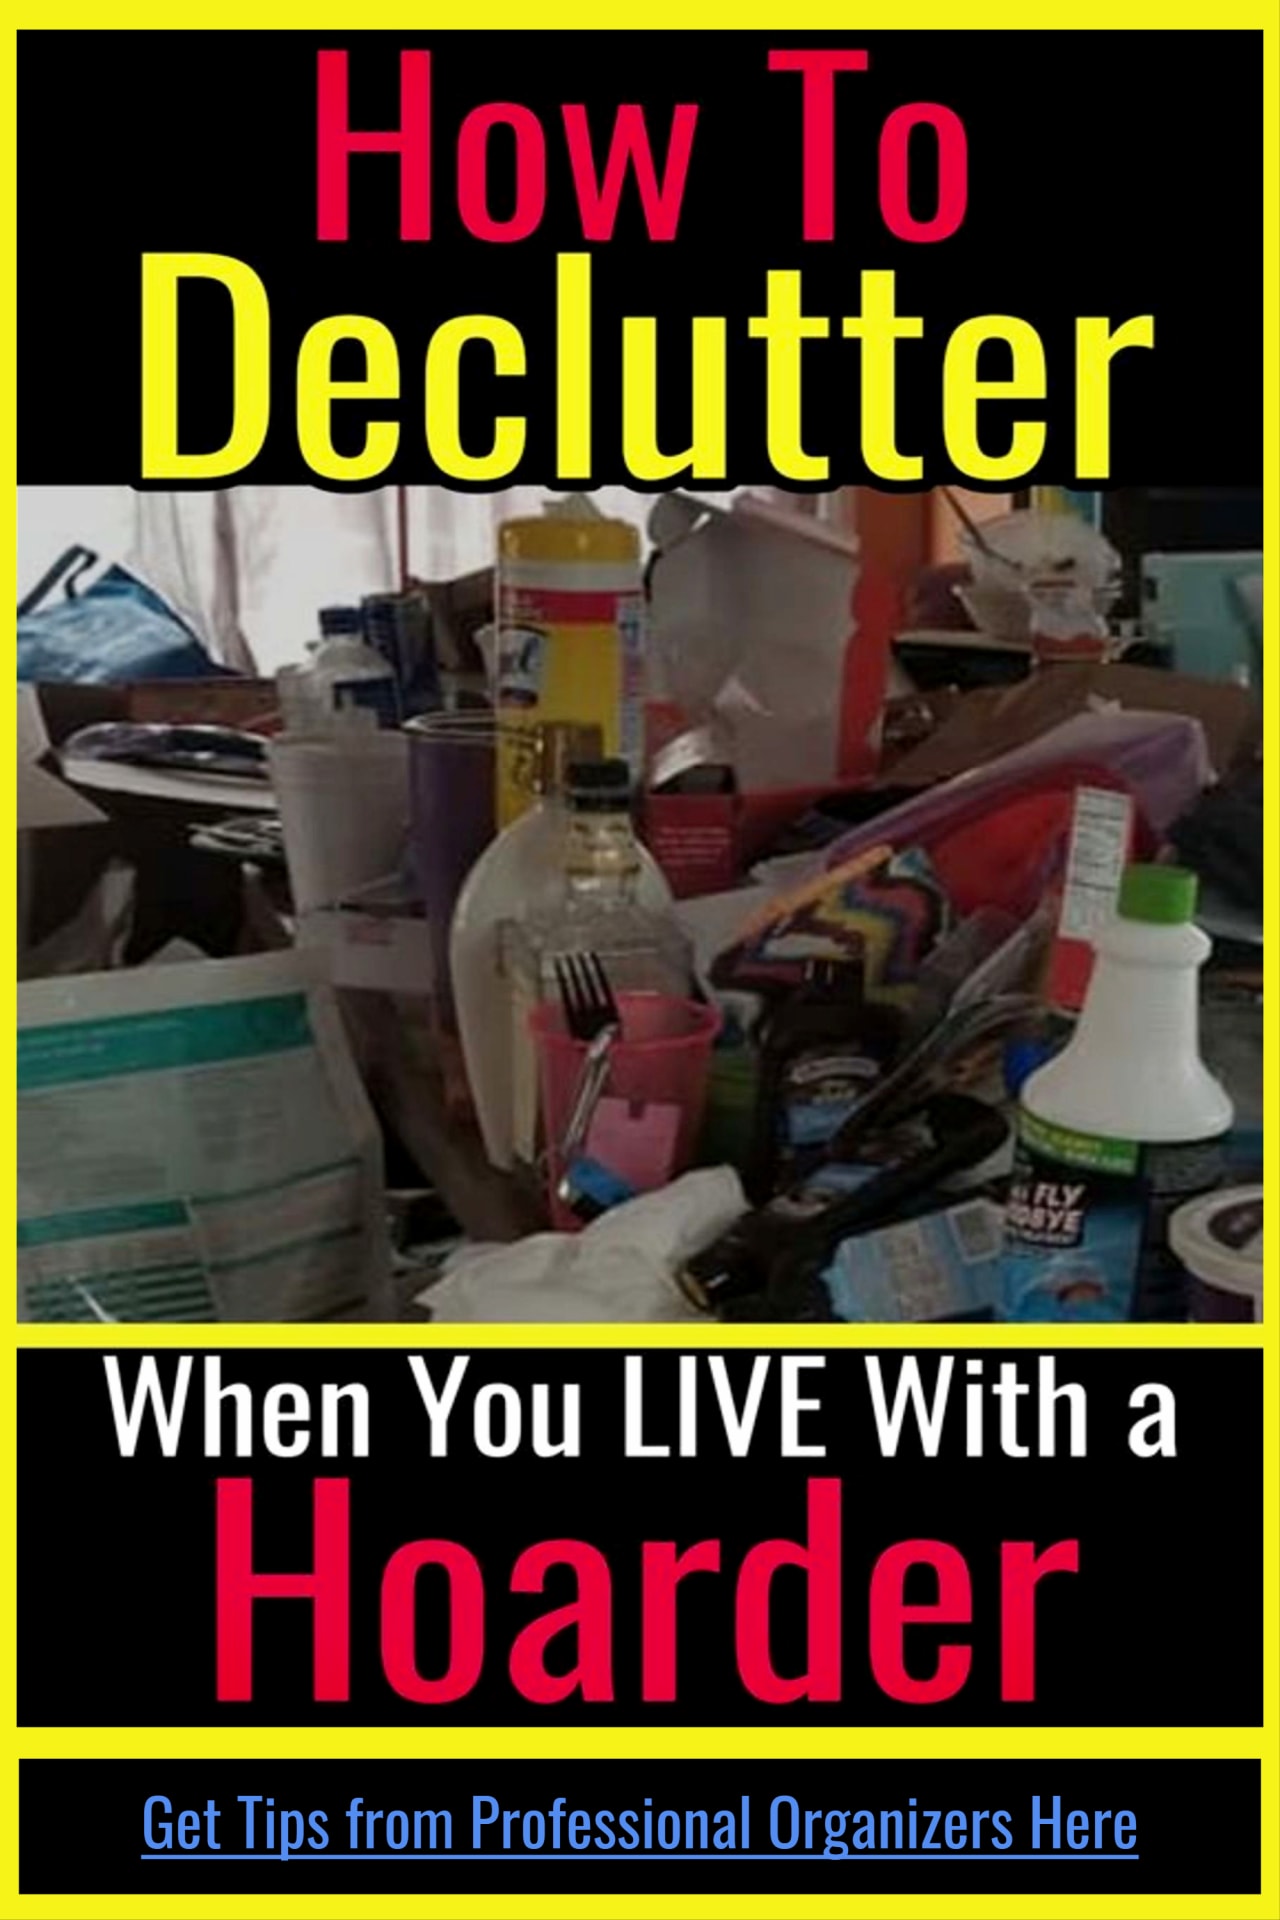 Declutter and organize your entire house in one hour a day even if you live with a hoarder.  Declutter challenge to declutter and organize your home WITHOUT feeling overwhelmed